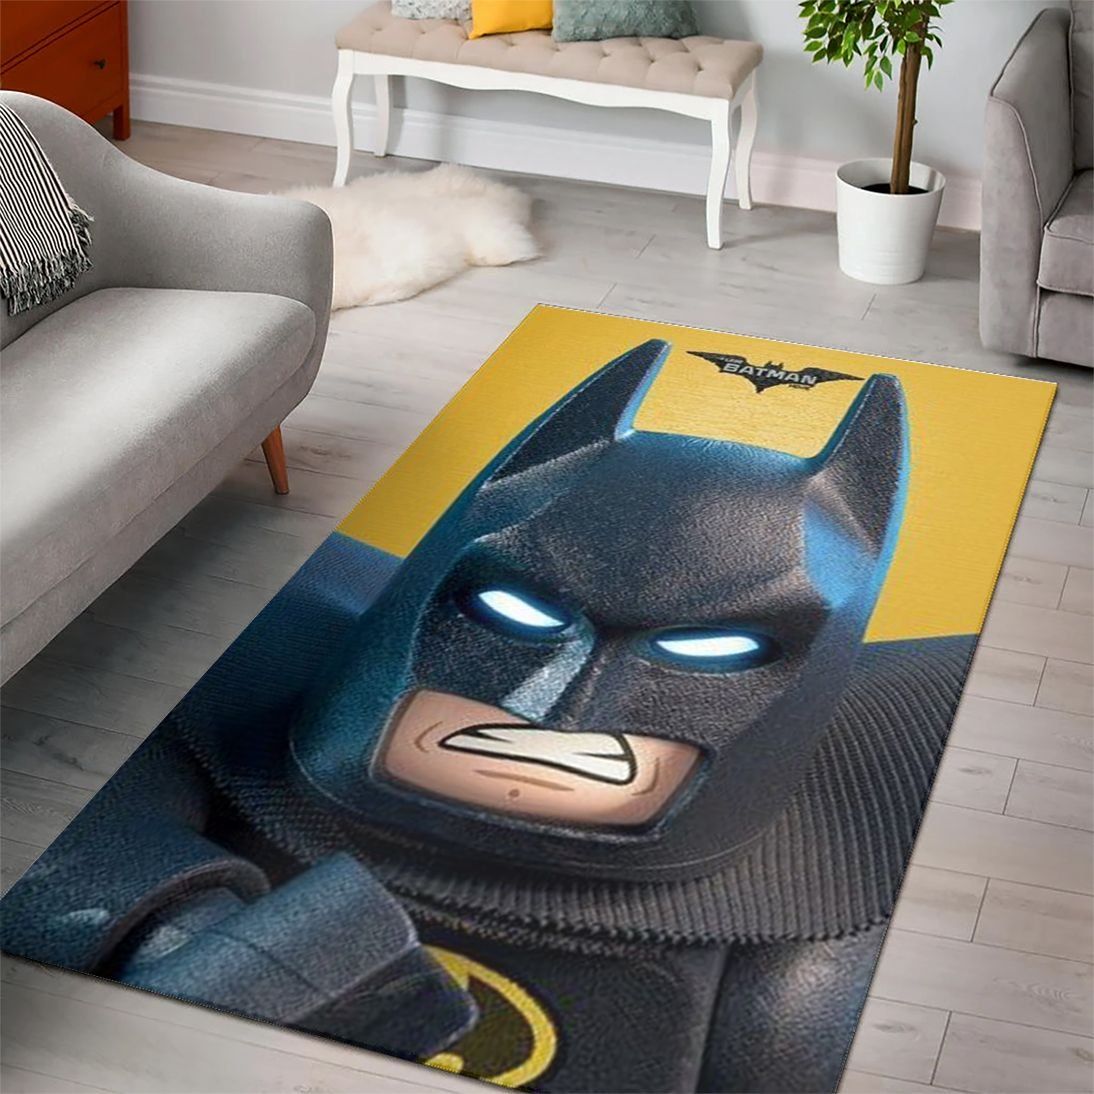 THE LEGO BATMAN MOVIES COLLECTION AREA RUGS LIVING – CUSTOM SIZE AND PRINTING